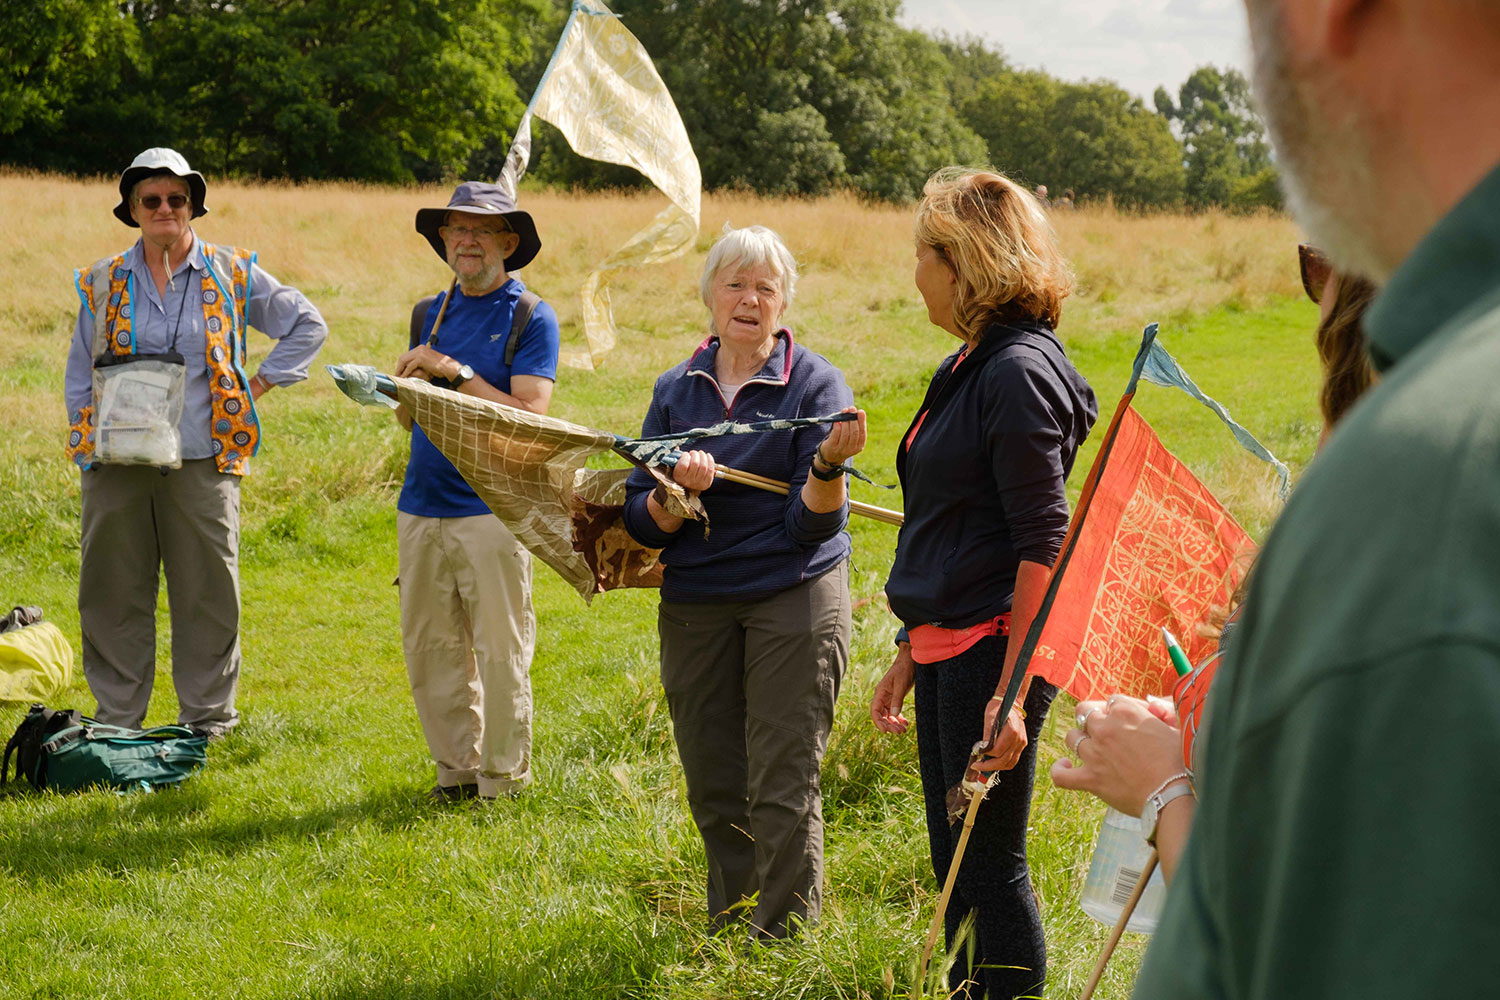 Walkers gather in a group on grass holding silk pennants while Lesley talks about the dyes used to colour them